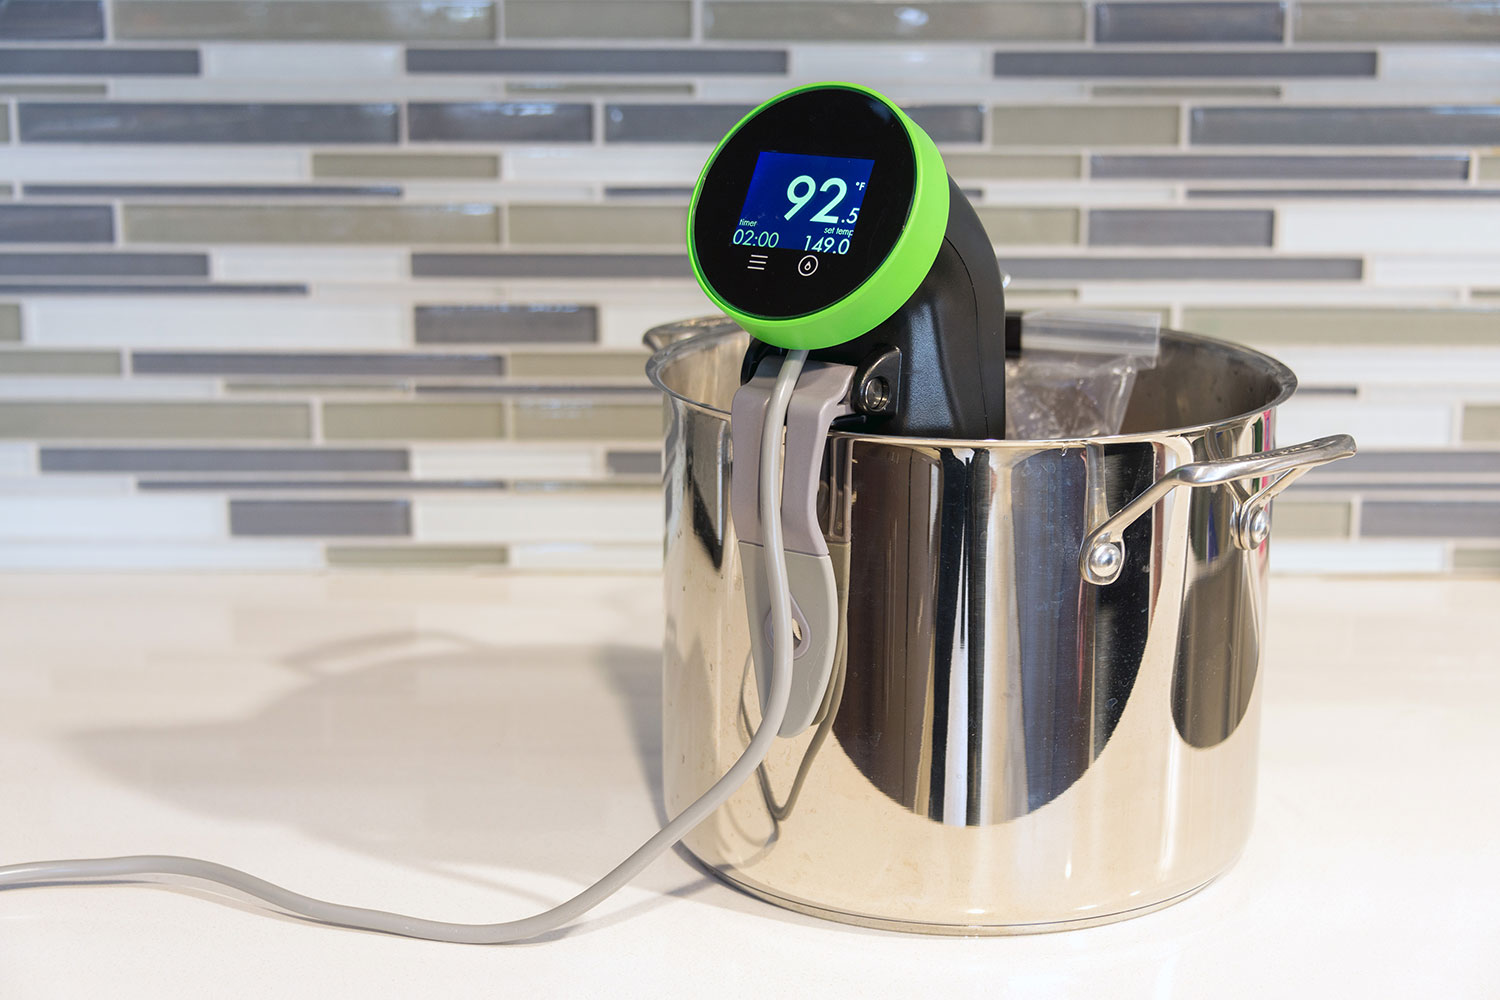 Common Sous Vide Problems Solved - Sous Vide Weights - Sous Vide Hub